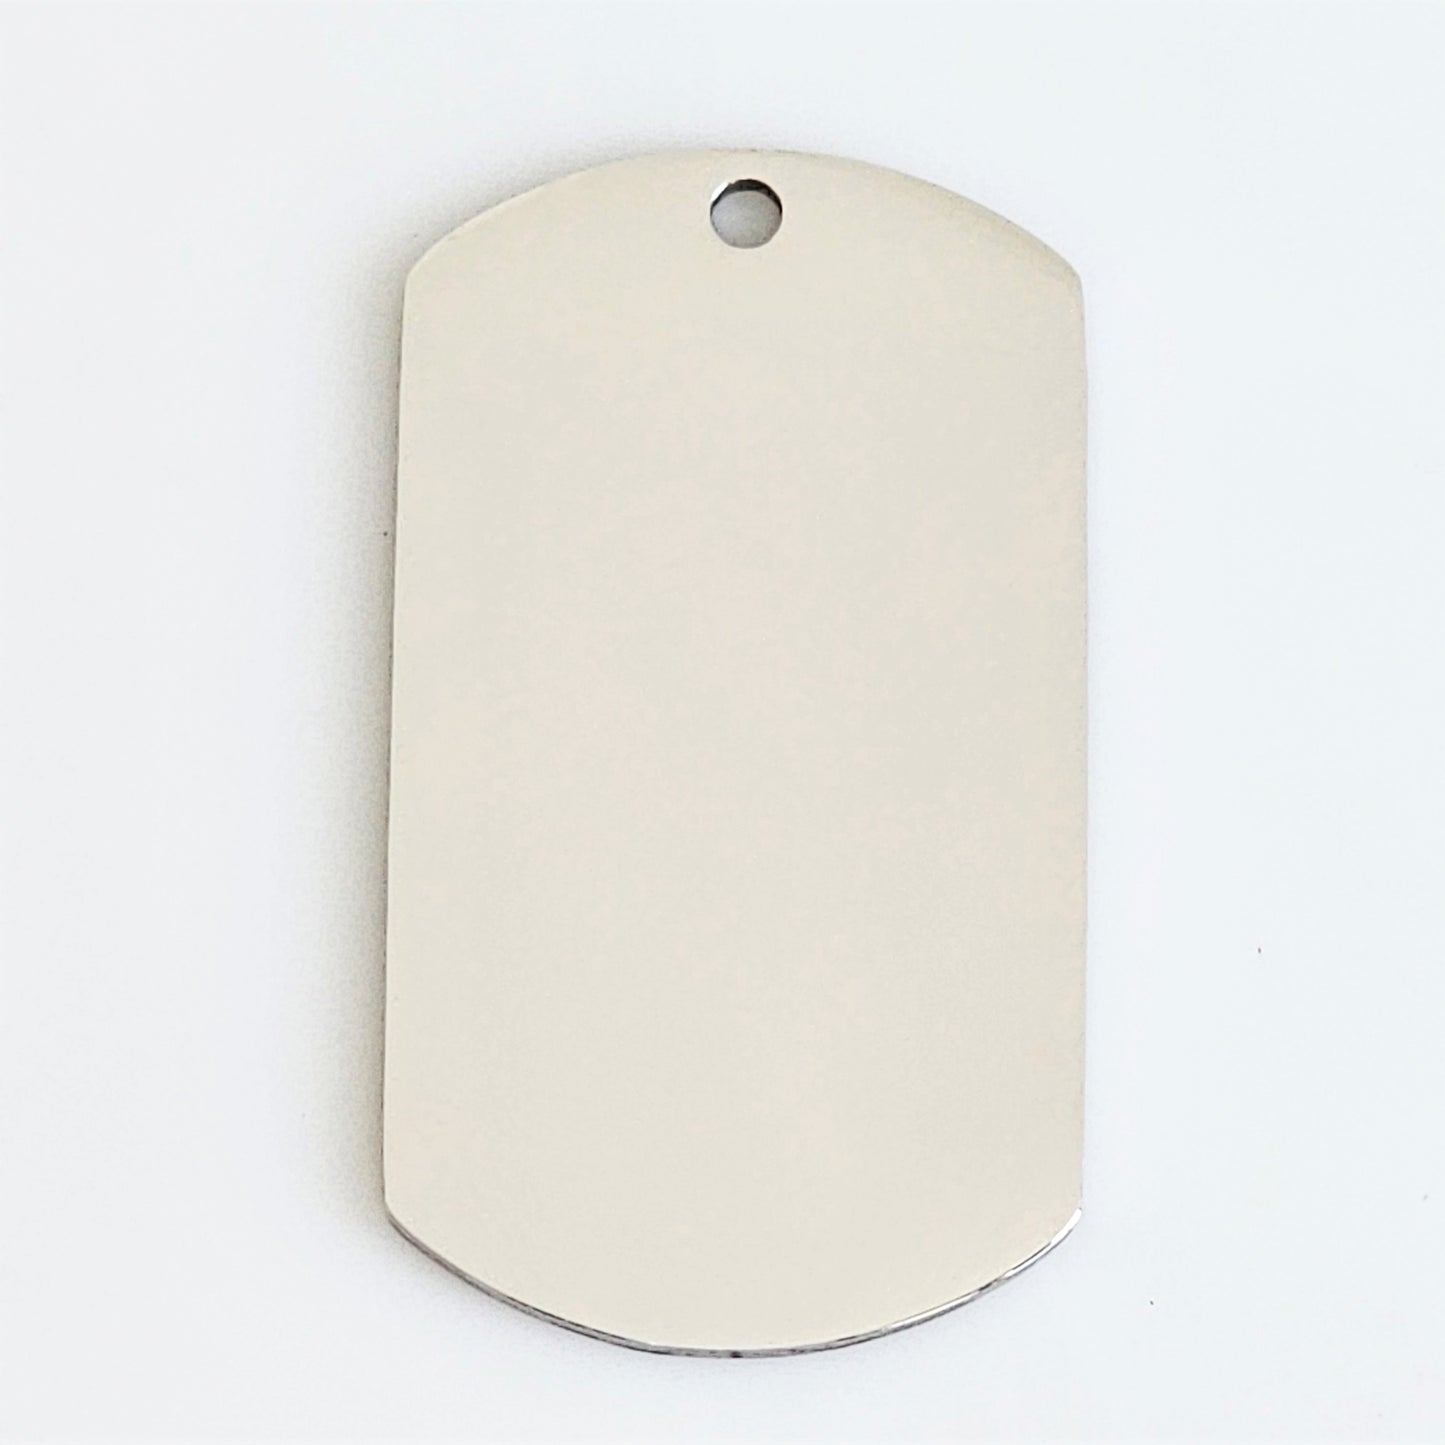 Stainless Steel - 1" x 1 3/4" Dog Tag